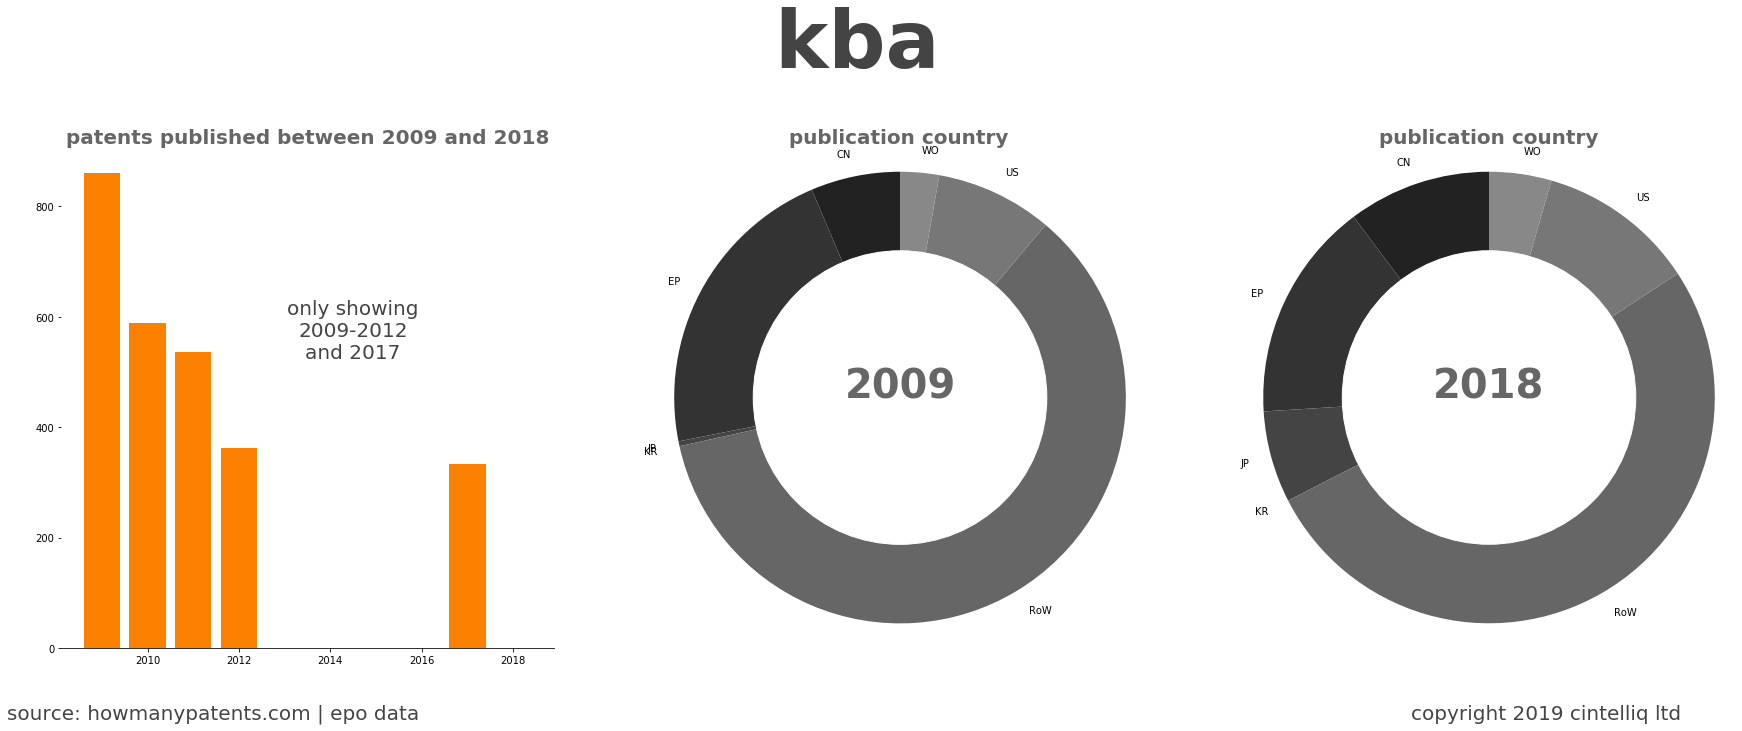 summary of patents for Kba 